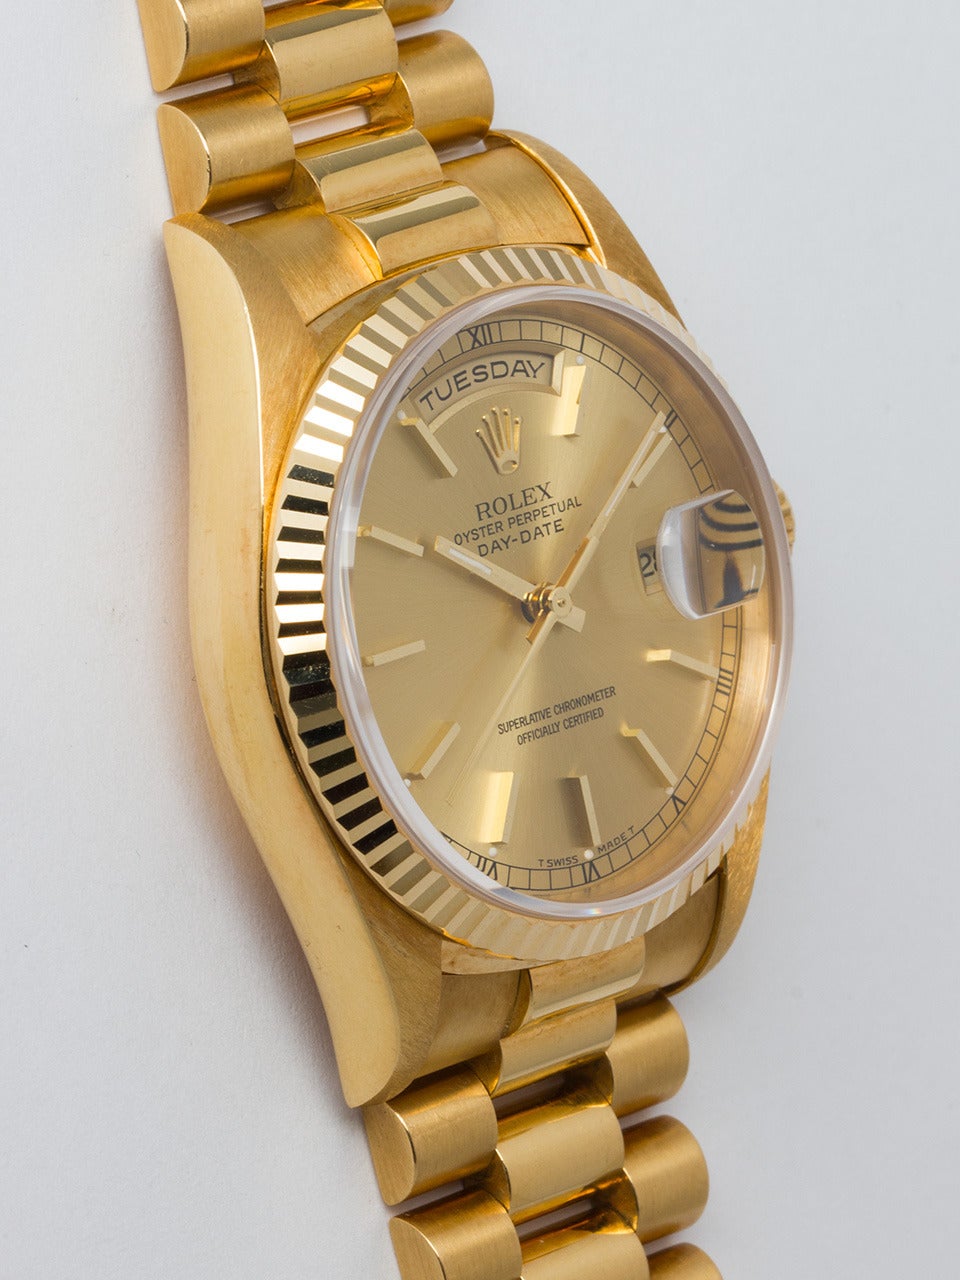 Rolex 18K Yellow Gold Day Date President Wristwatch ref 18238 serial # T4 circa 1998. 36mm diameter case with fluted bezel and sapphire crystal. Original champagne dial with applied gold indexes and hands. Powered by self winding double quick set